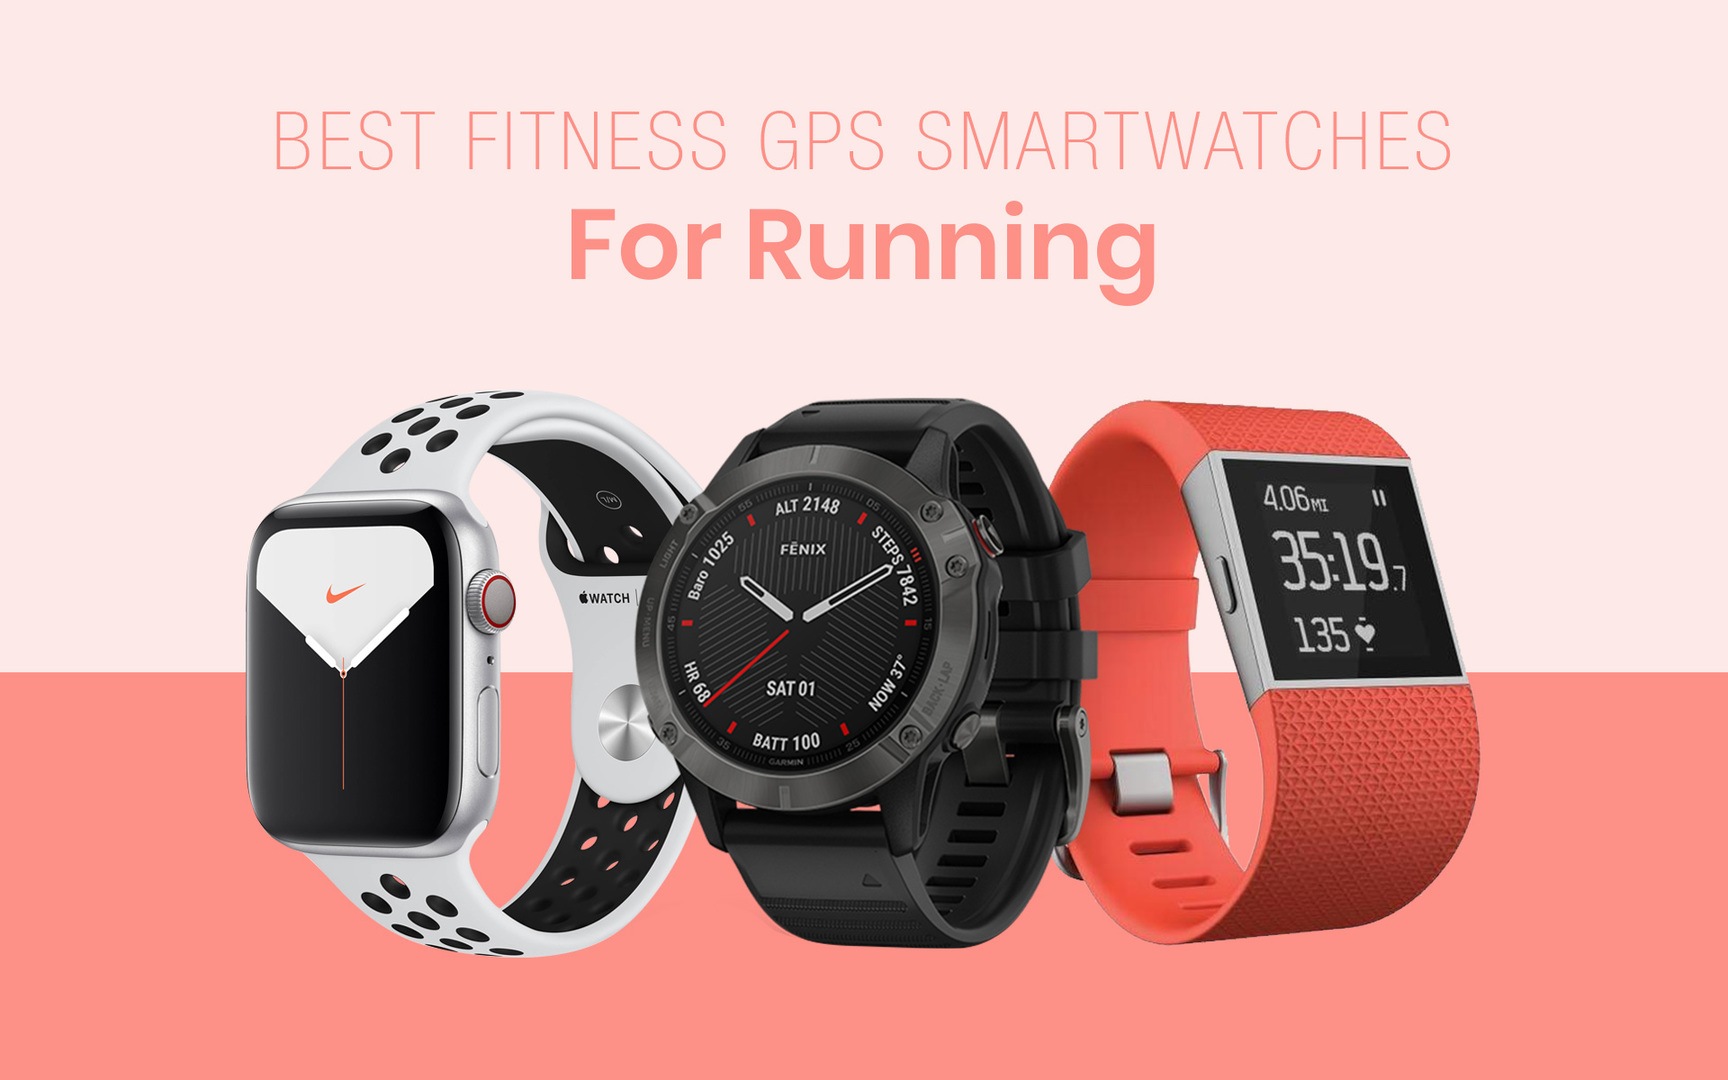 Best Fitness GPS Smartwatches for Running